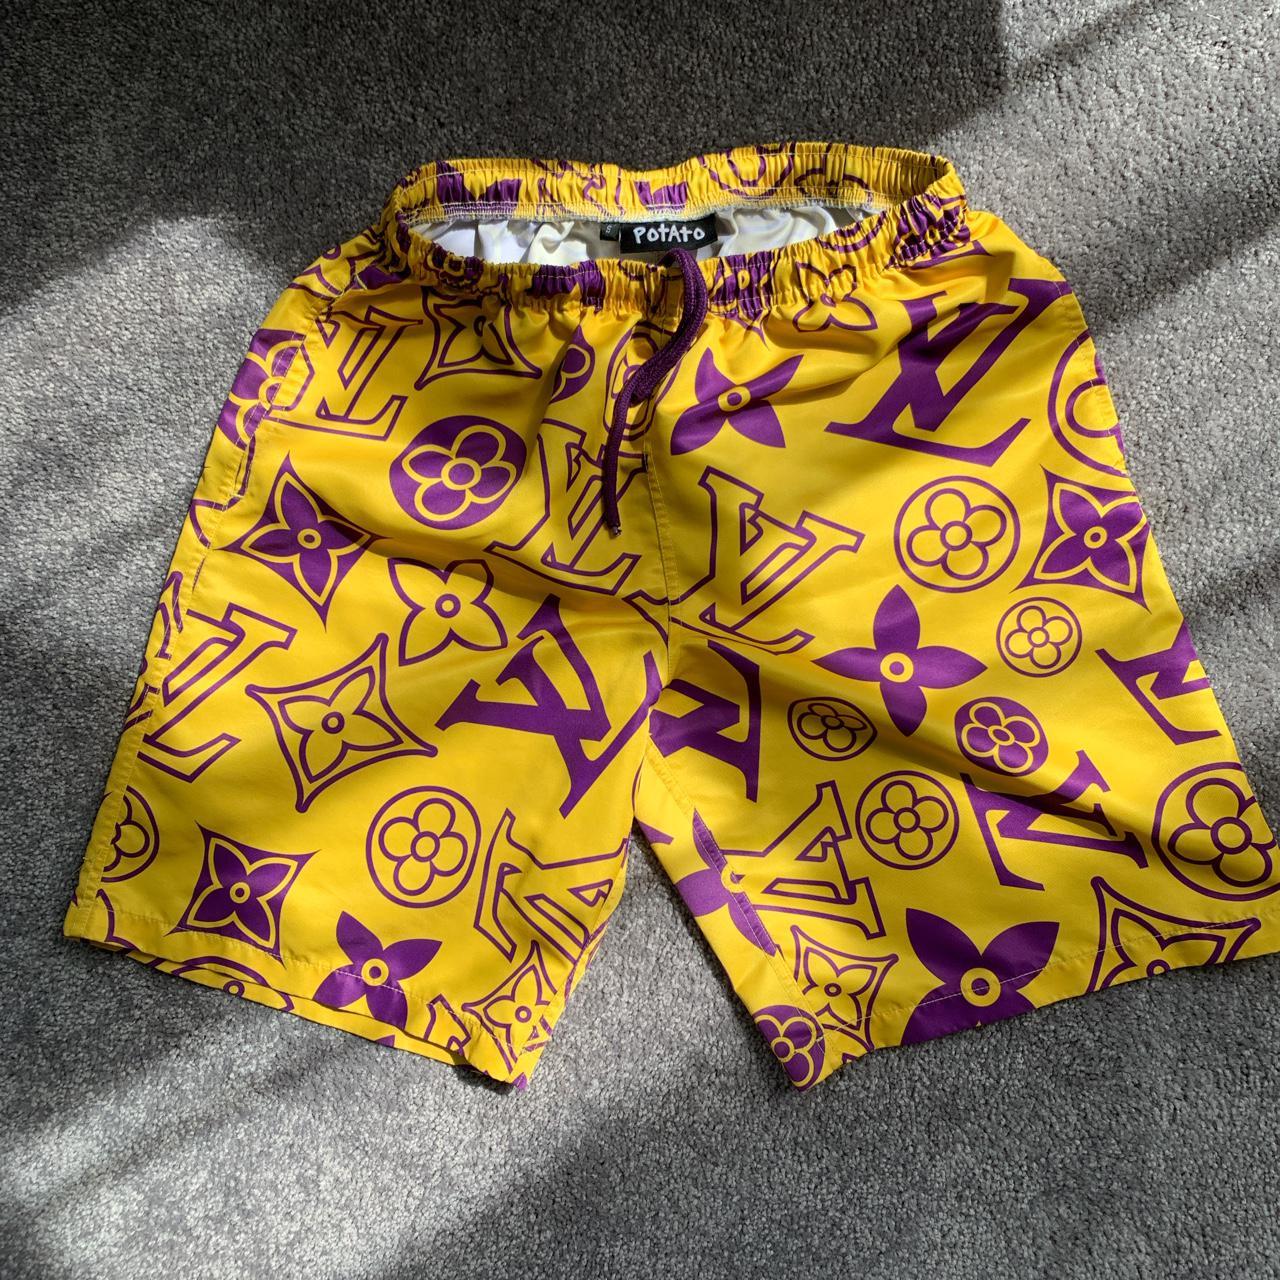 Men's Louis Vuitton Shorts, New & Used